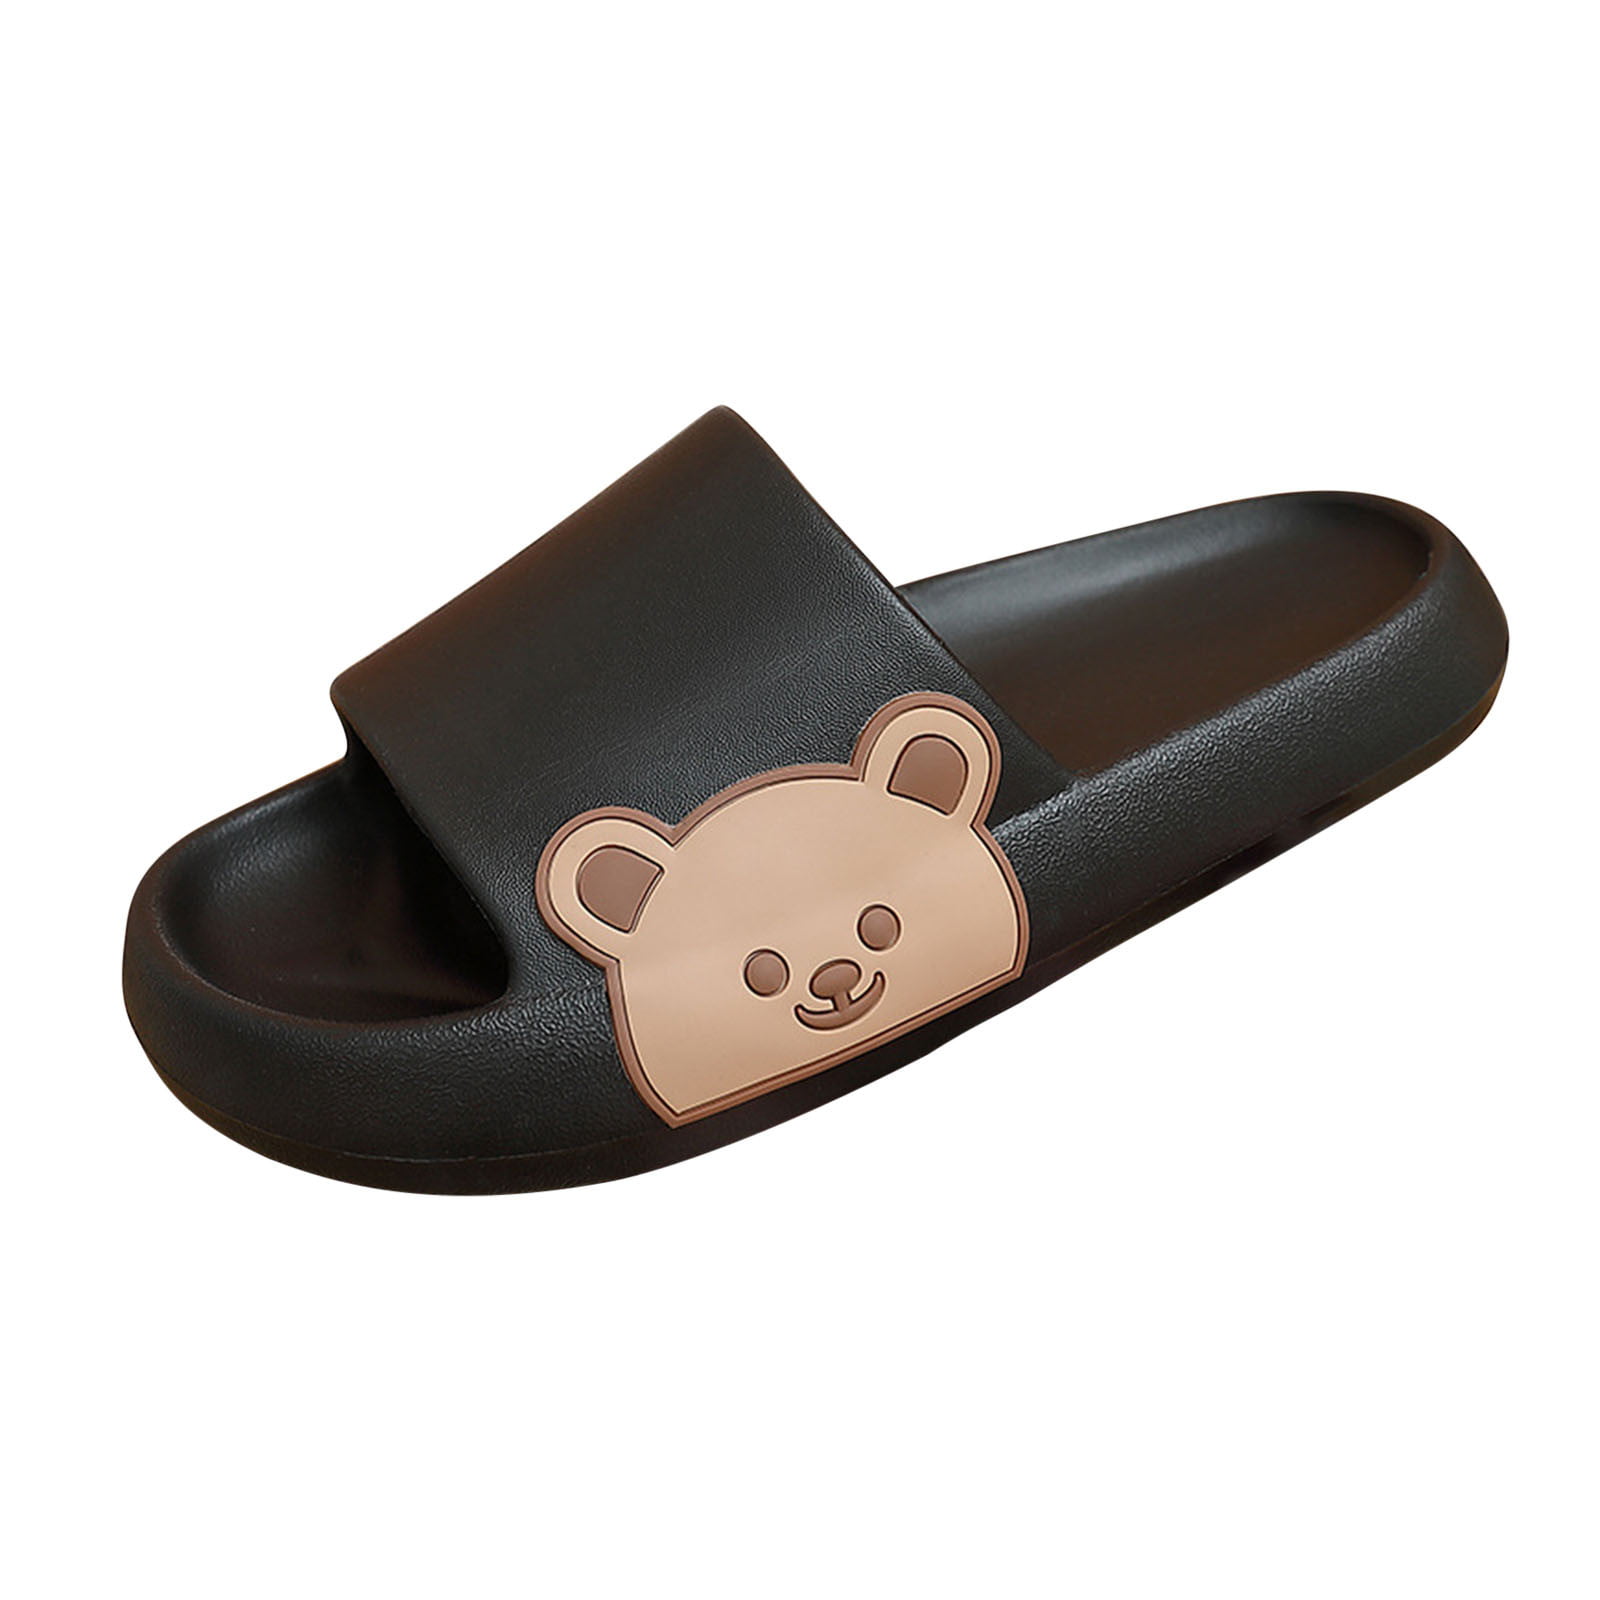 Vetements just relaunched the teddybear slippers from your childhood